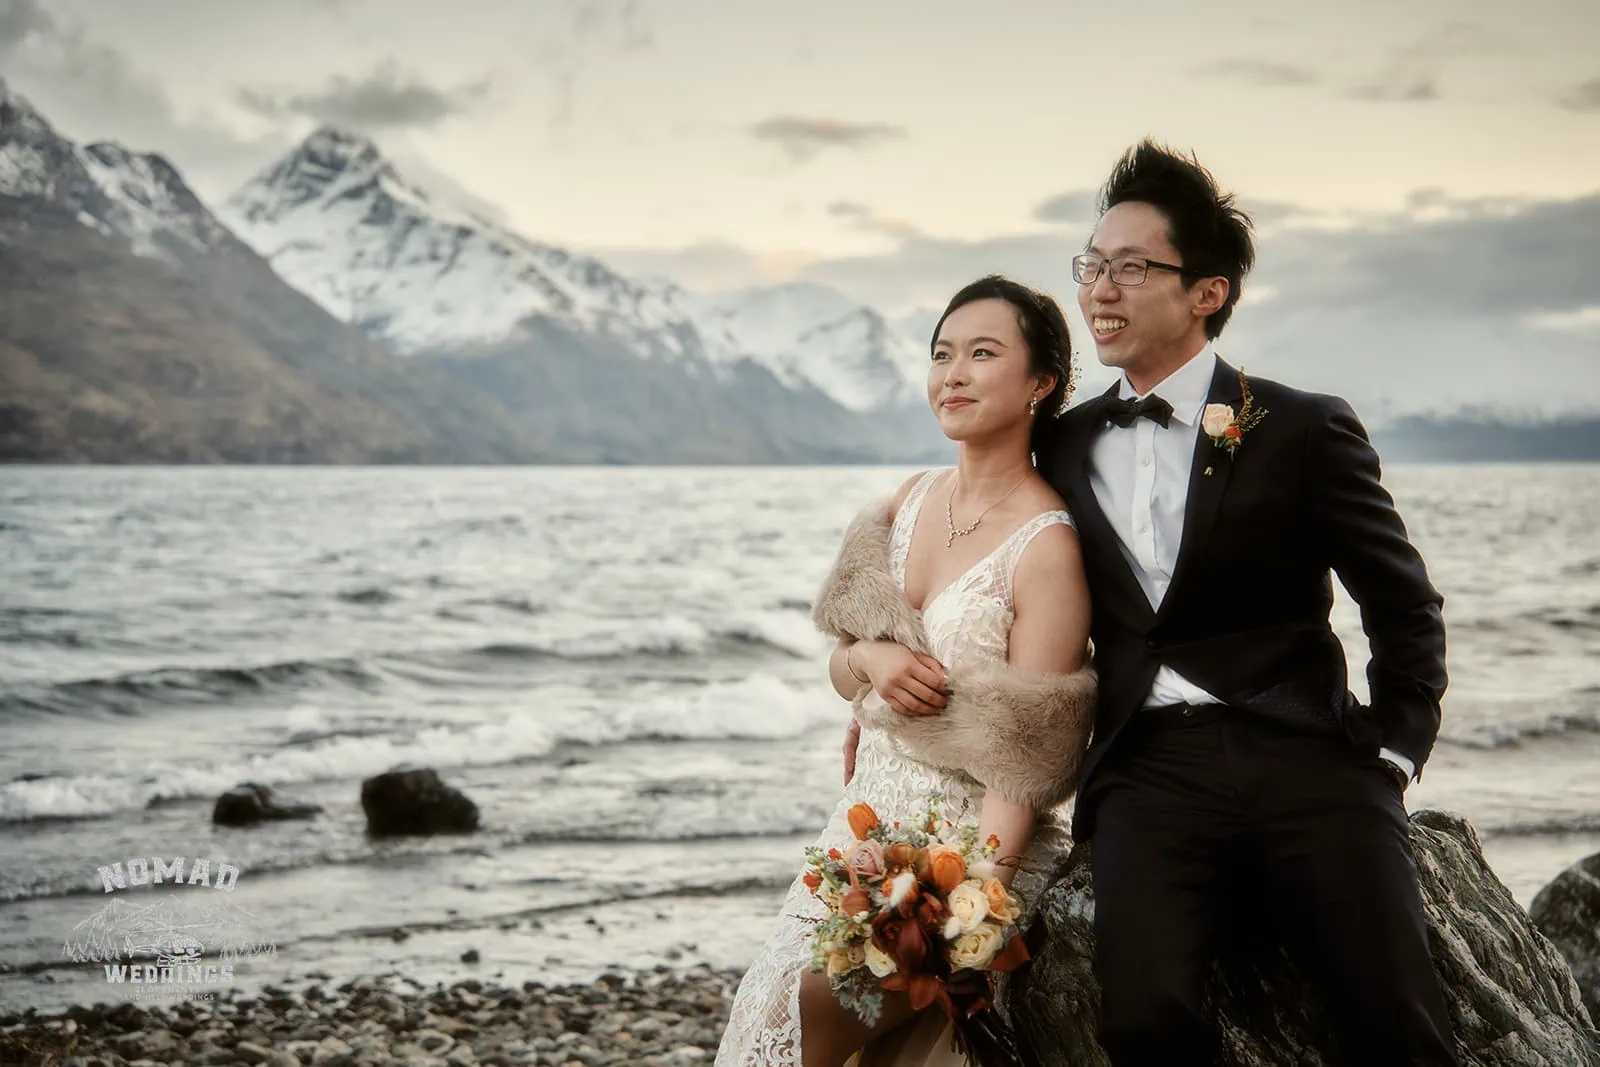 Joanna and Tony posing for a pre-wedding shoot in front of a lake in Queenstown, New Zealand.